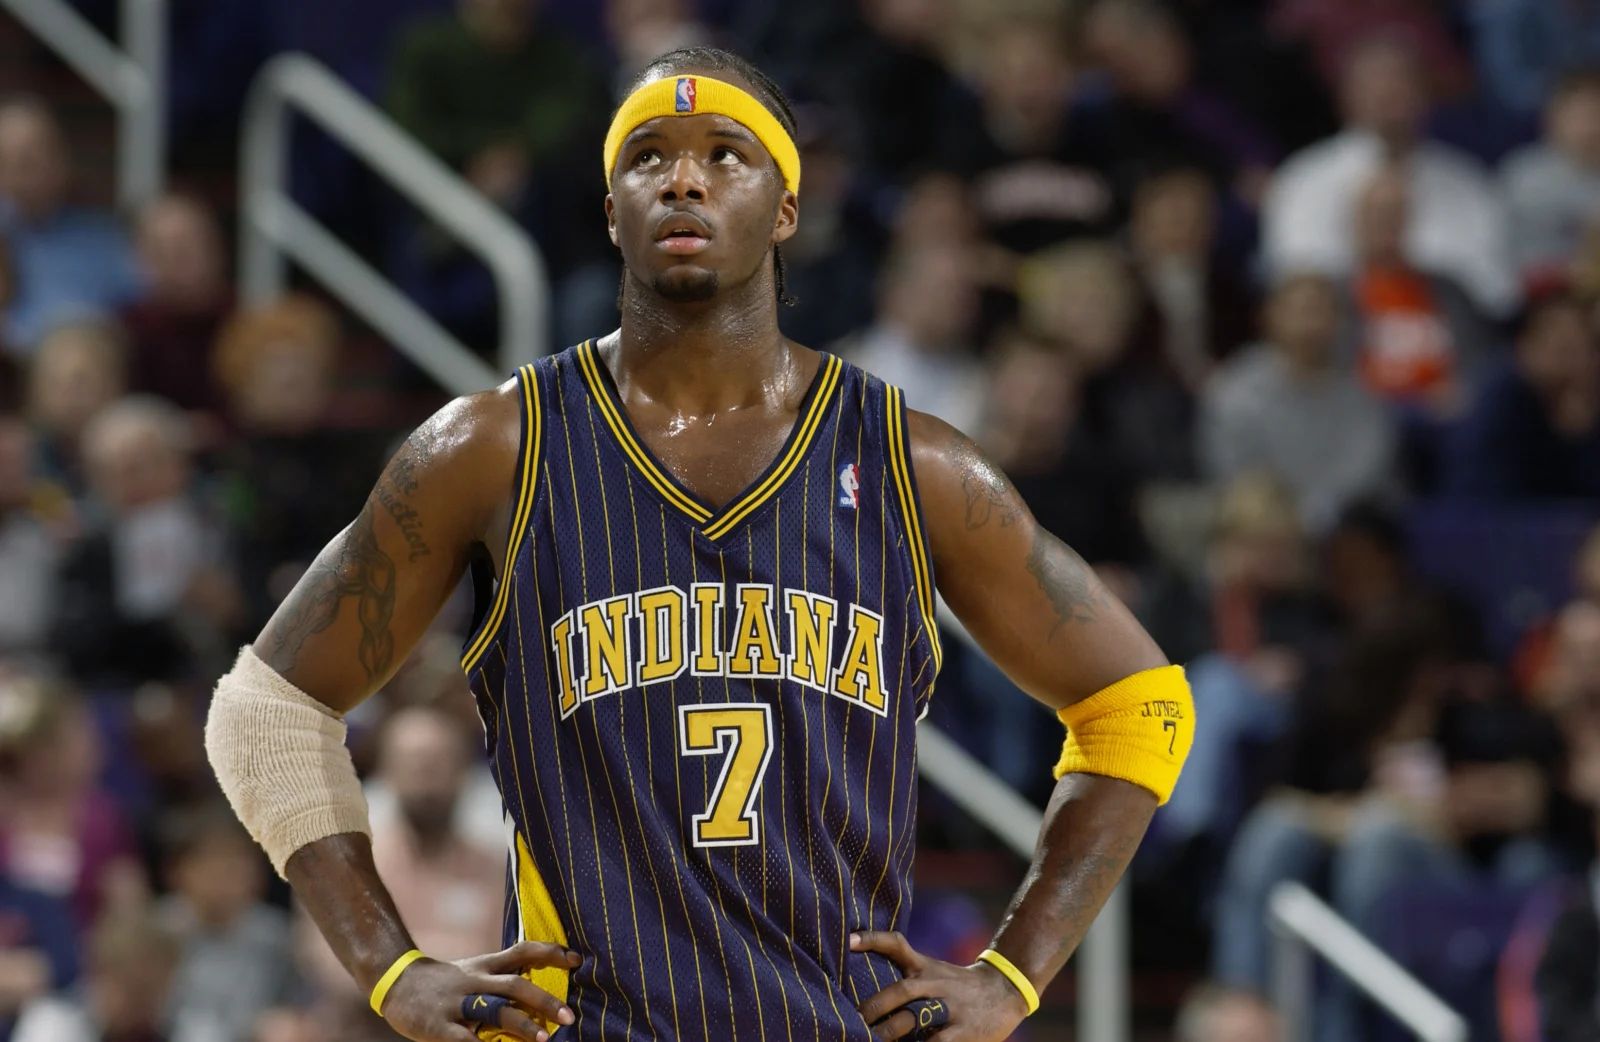 Pacers Legend Jermaine O’Neal Expresses Disappointment Over Buddy Hield Wearing #7